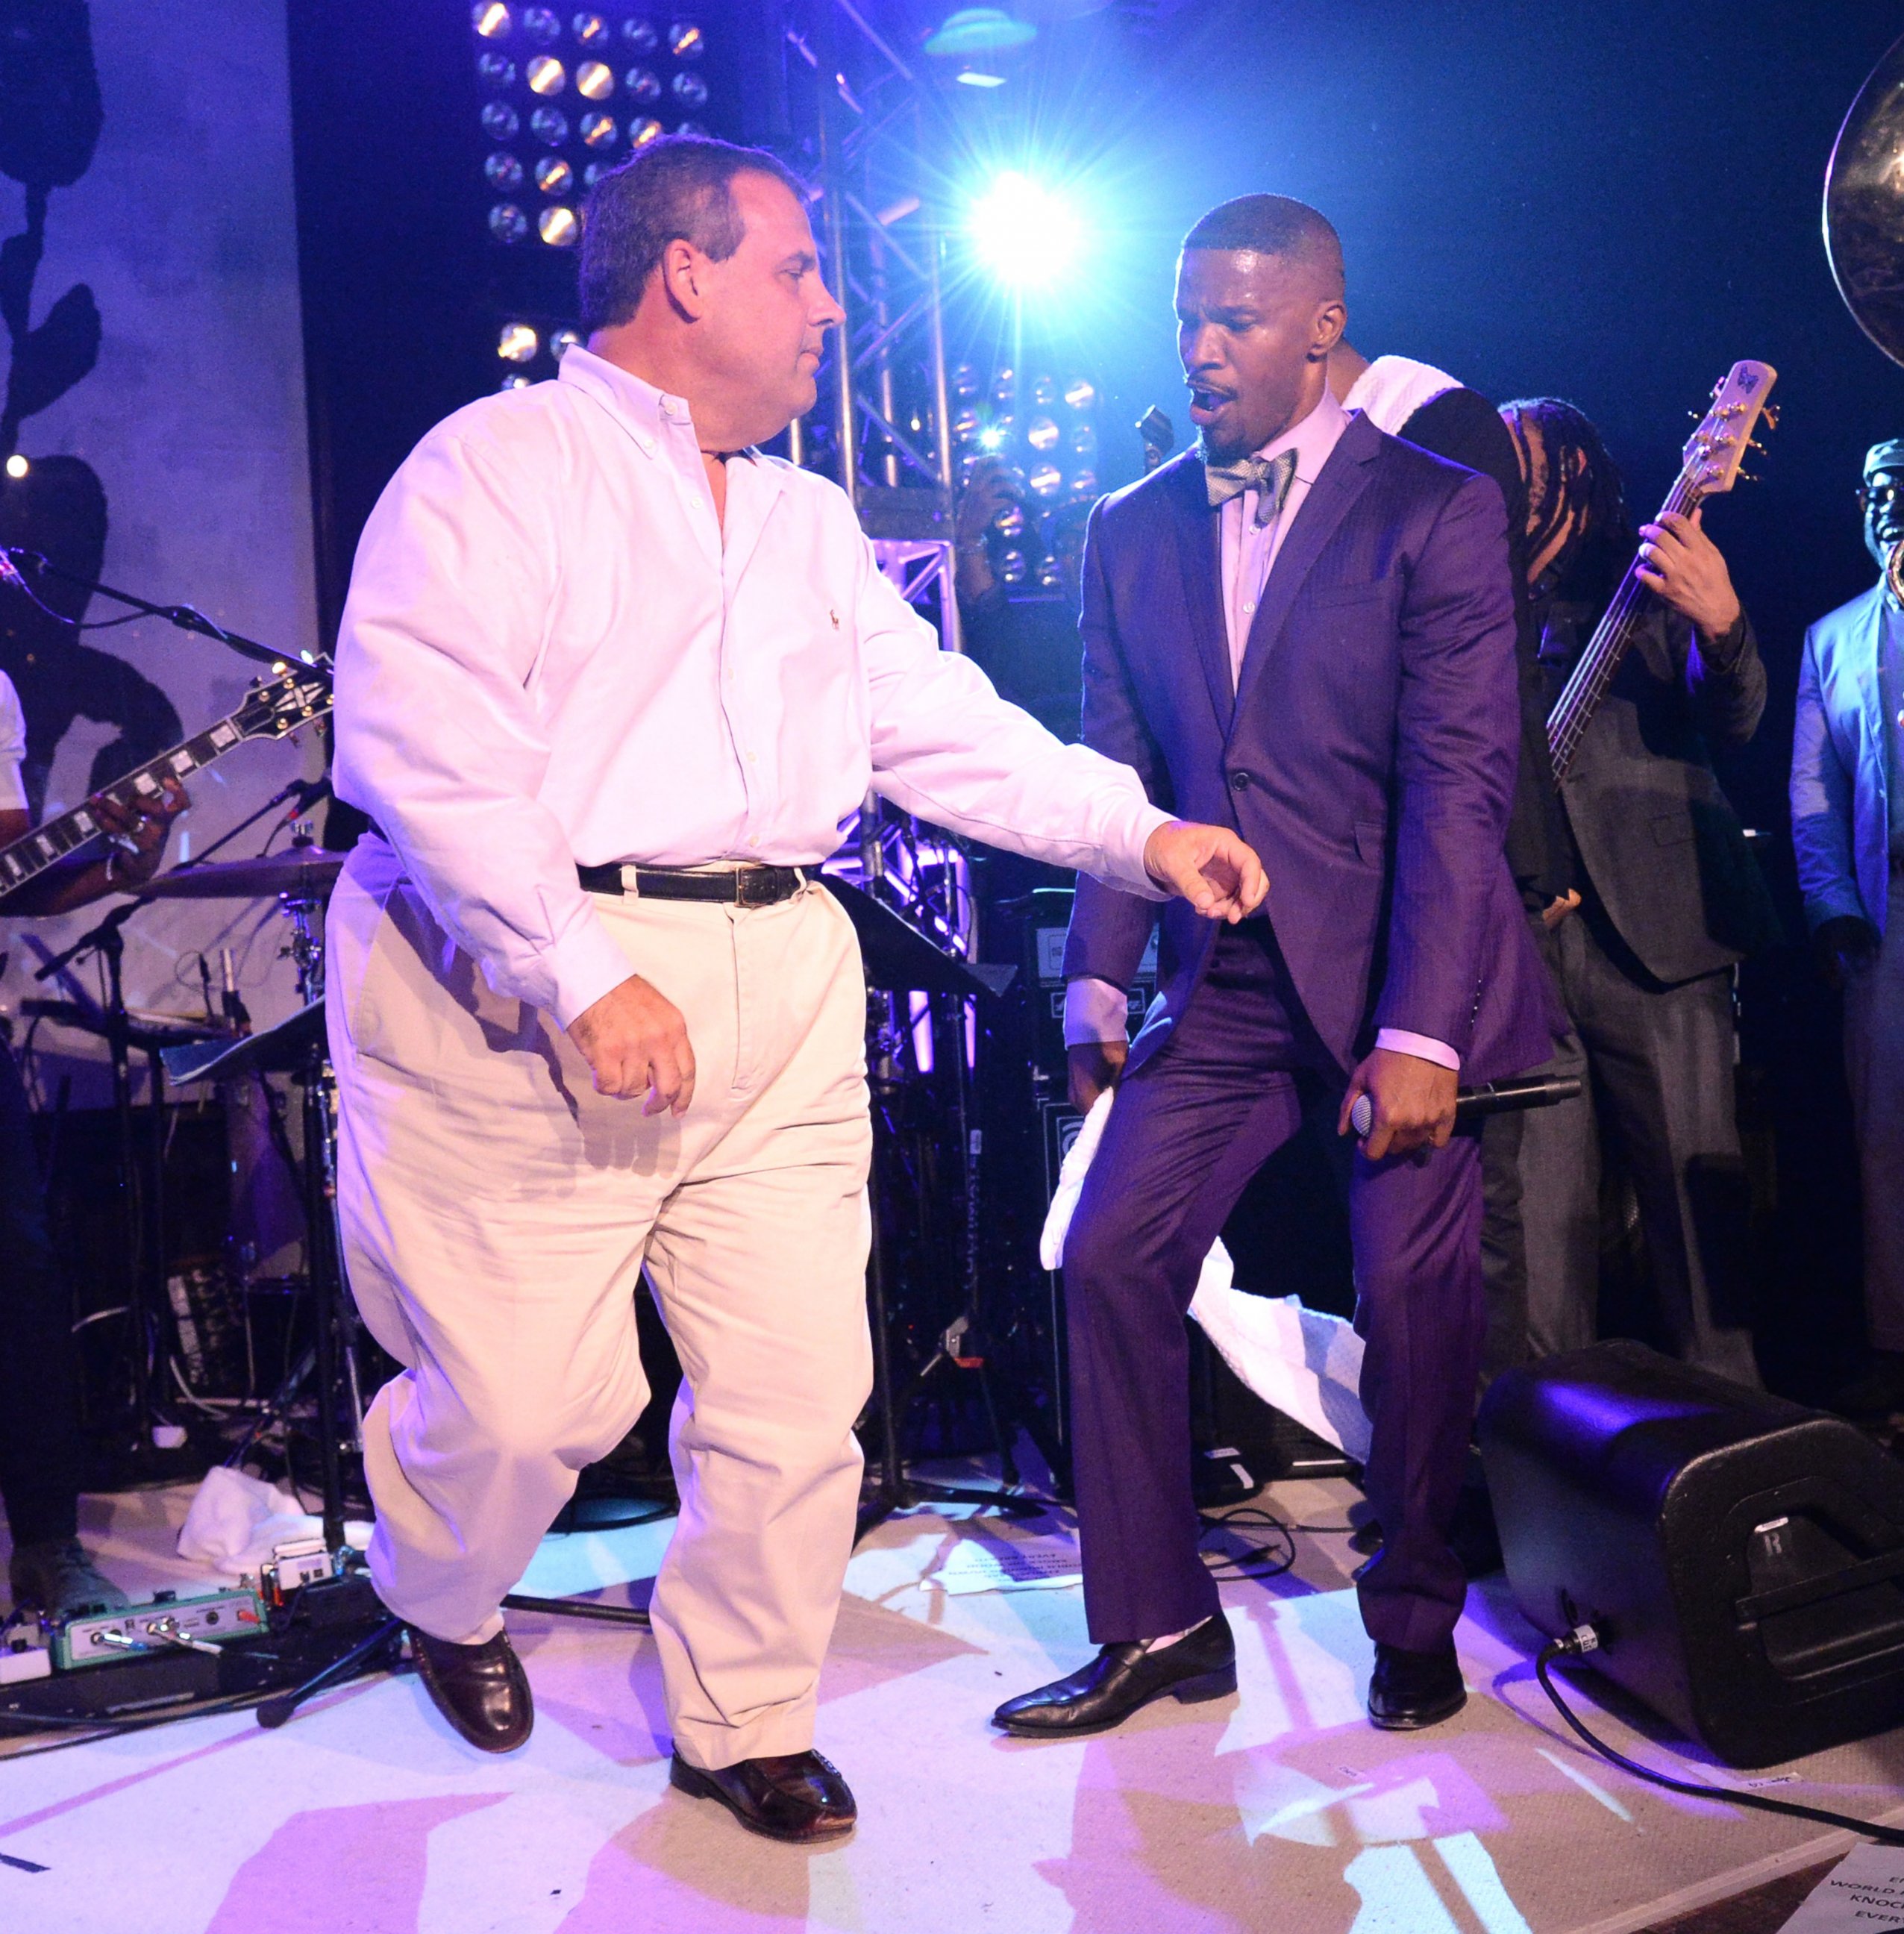 PHOTO: New Jersey Governor Chris Christie dances onstage with Jamie Foxx on Aug. 16, 2014, in East Hampton, N.Y.